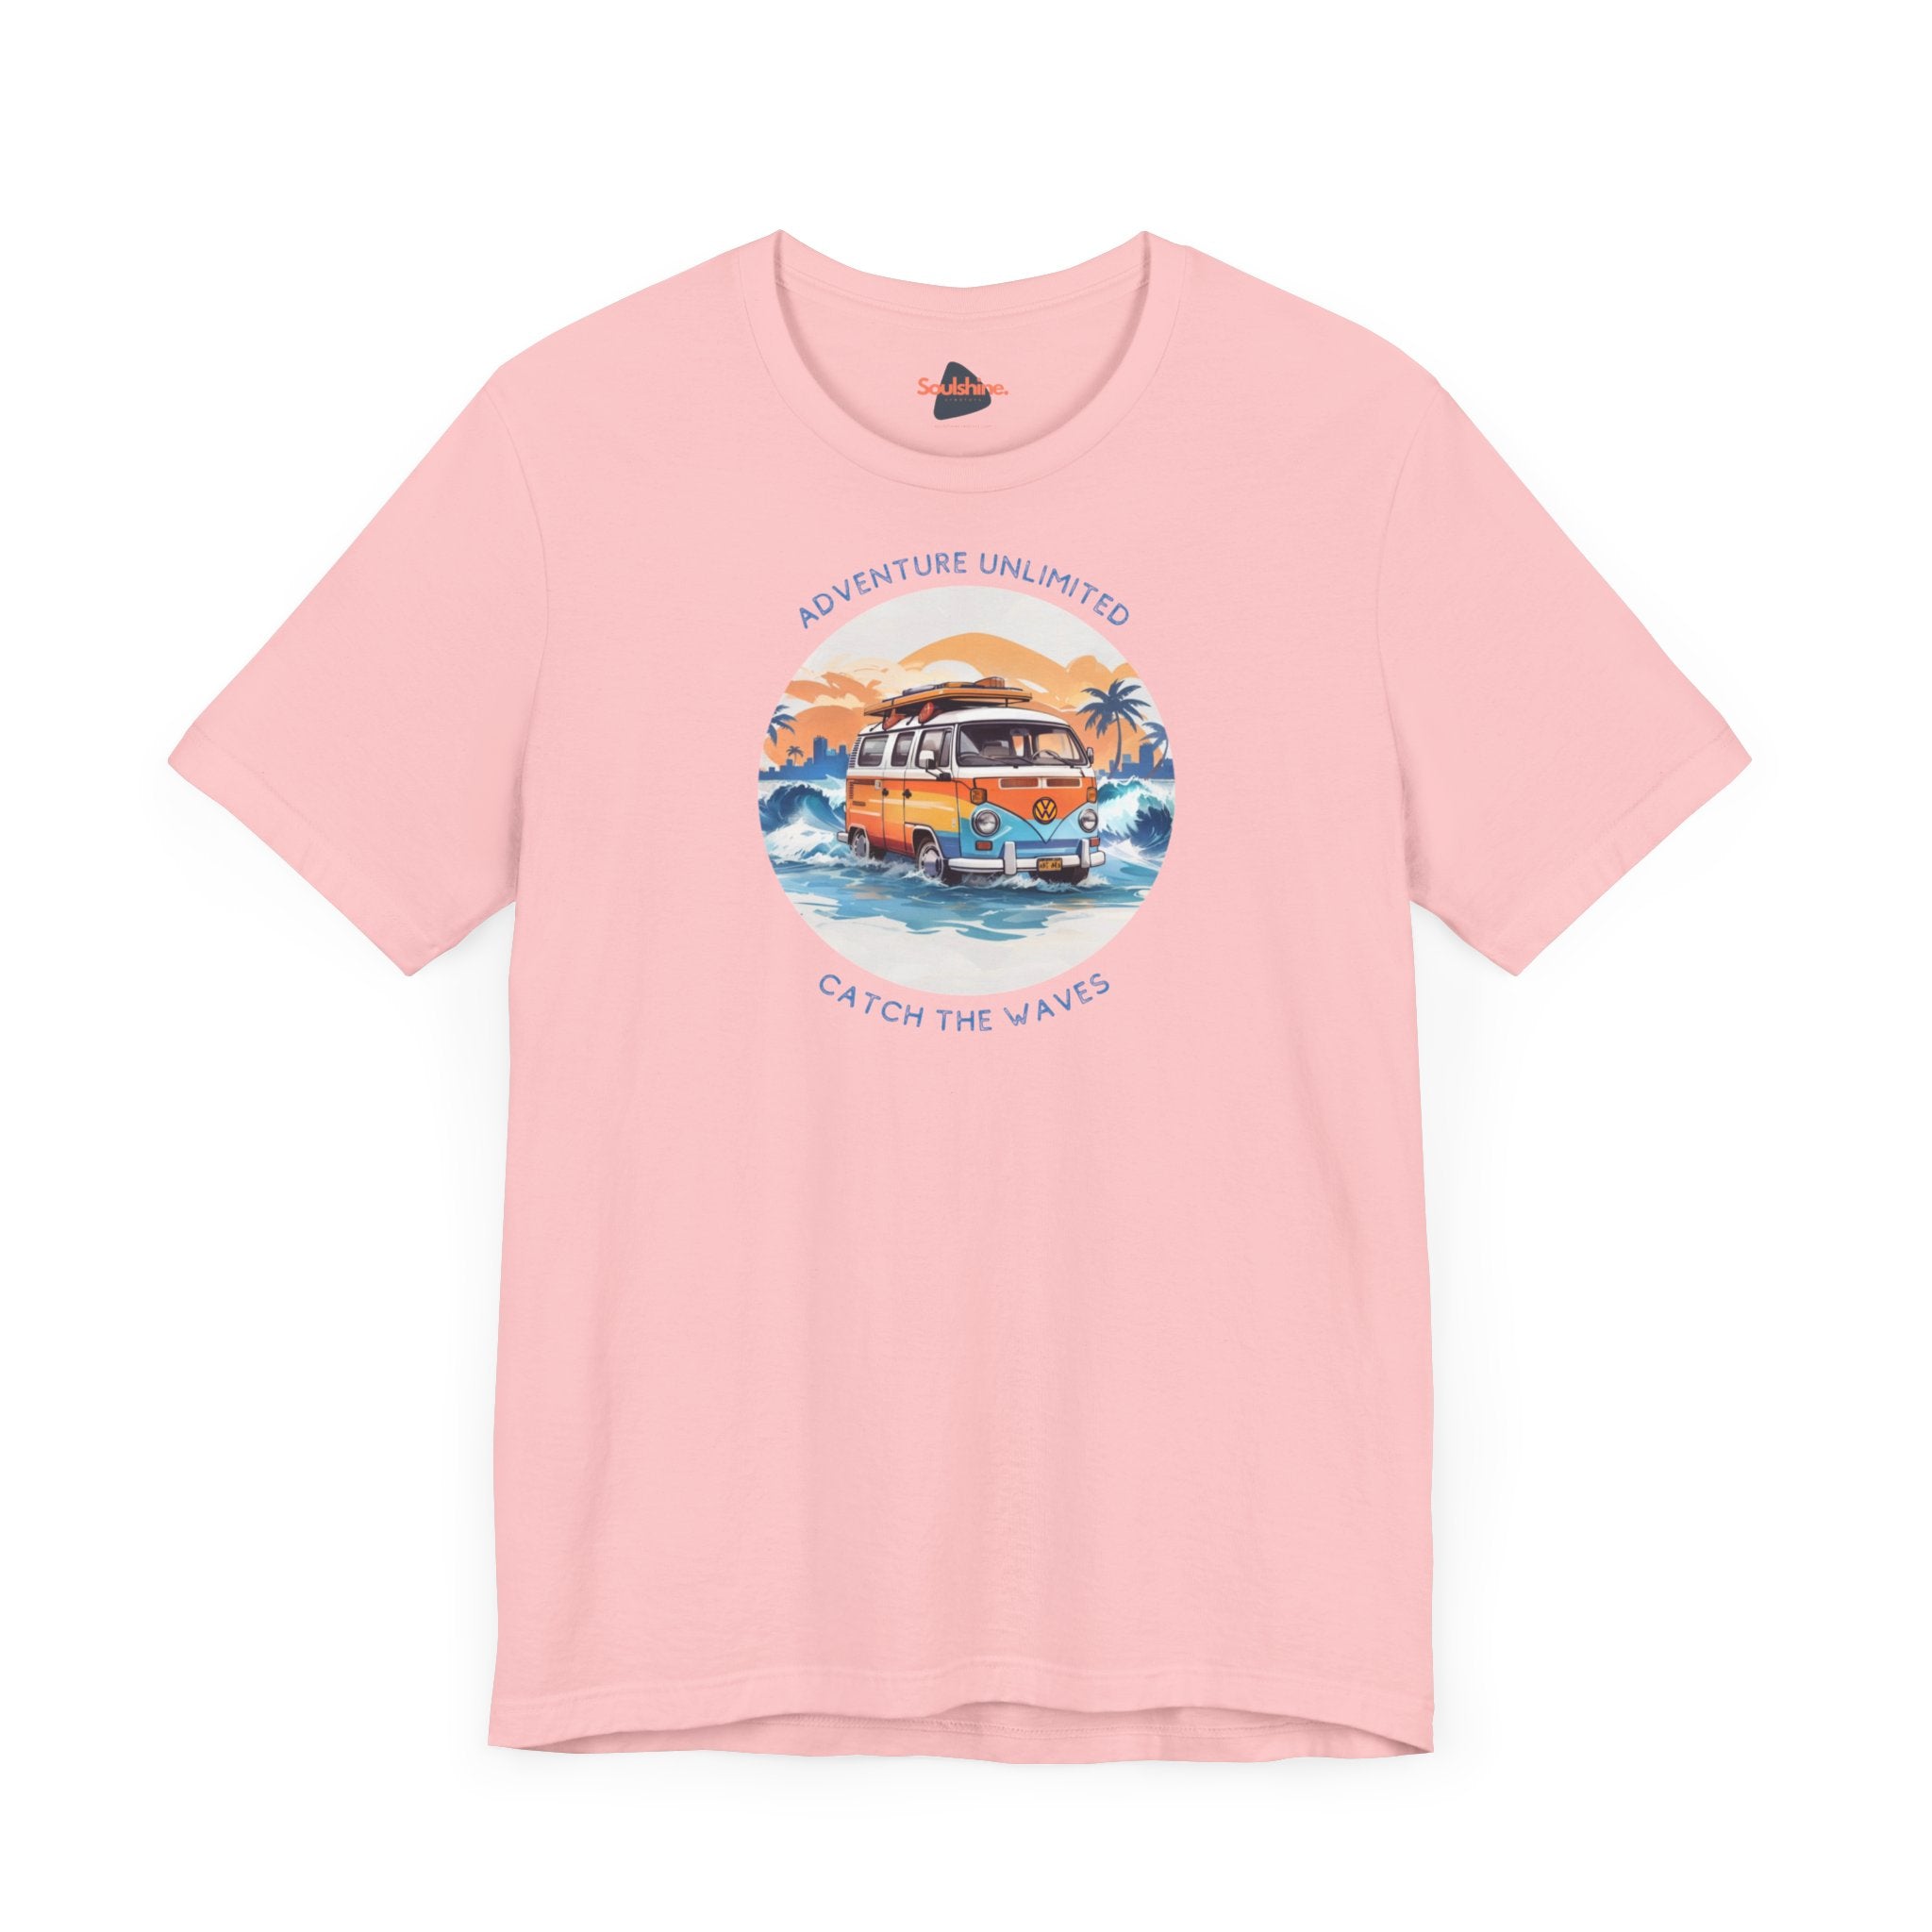 Adventure Unlimited Surfing T-Shirt featuring van and surfboard design - printed direct-to-garment on pink Bella & Canvas tee